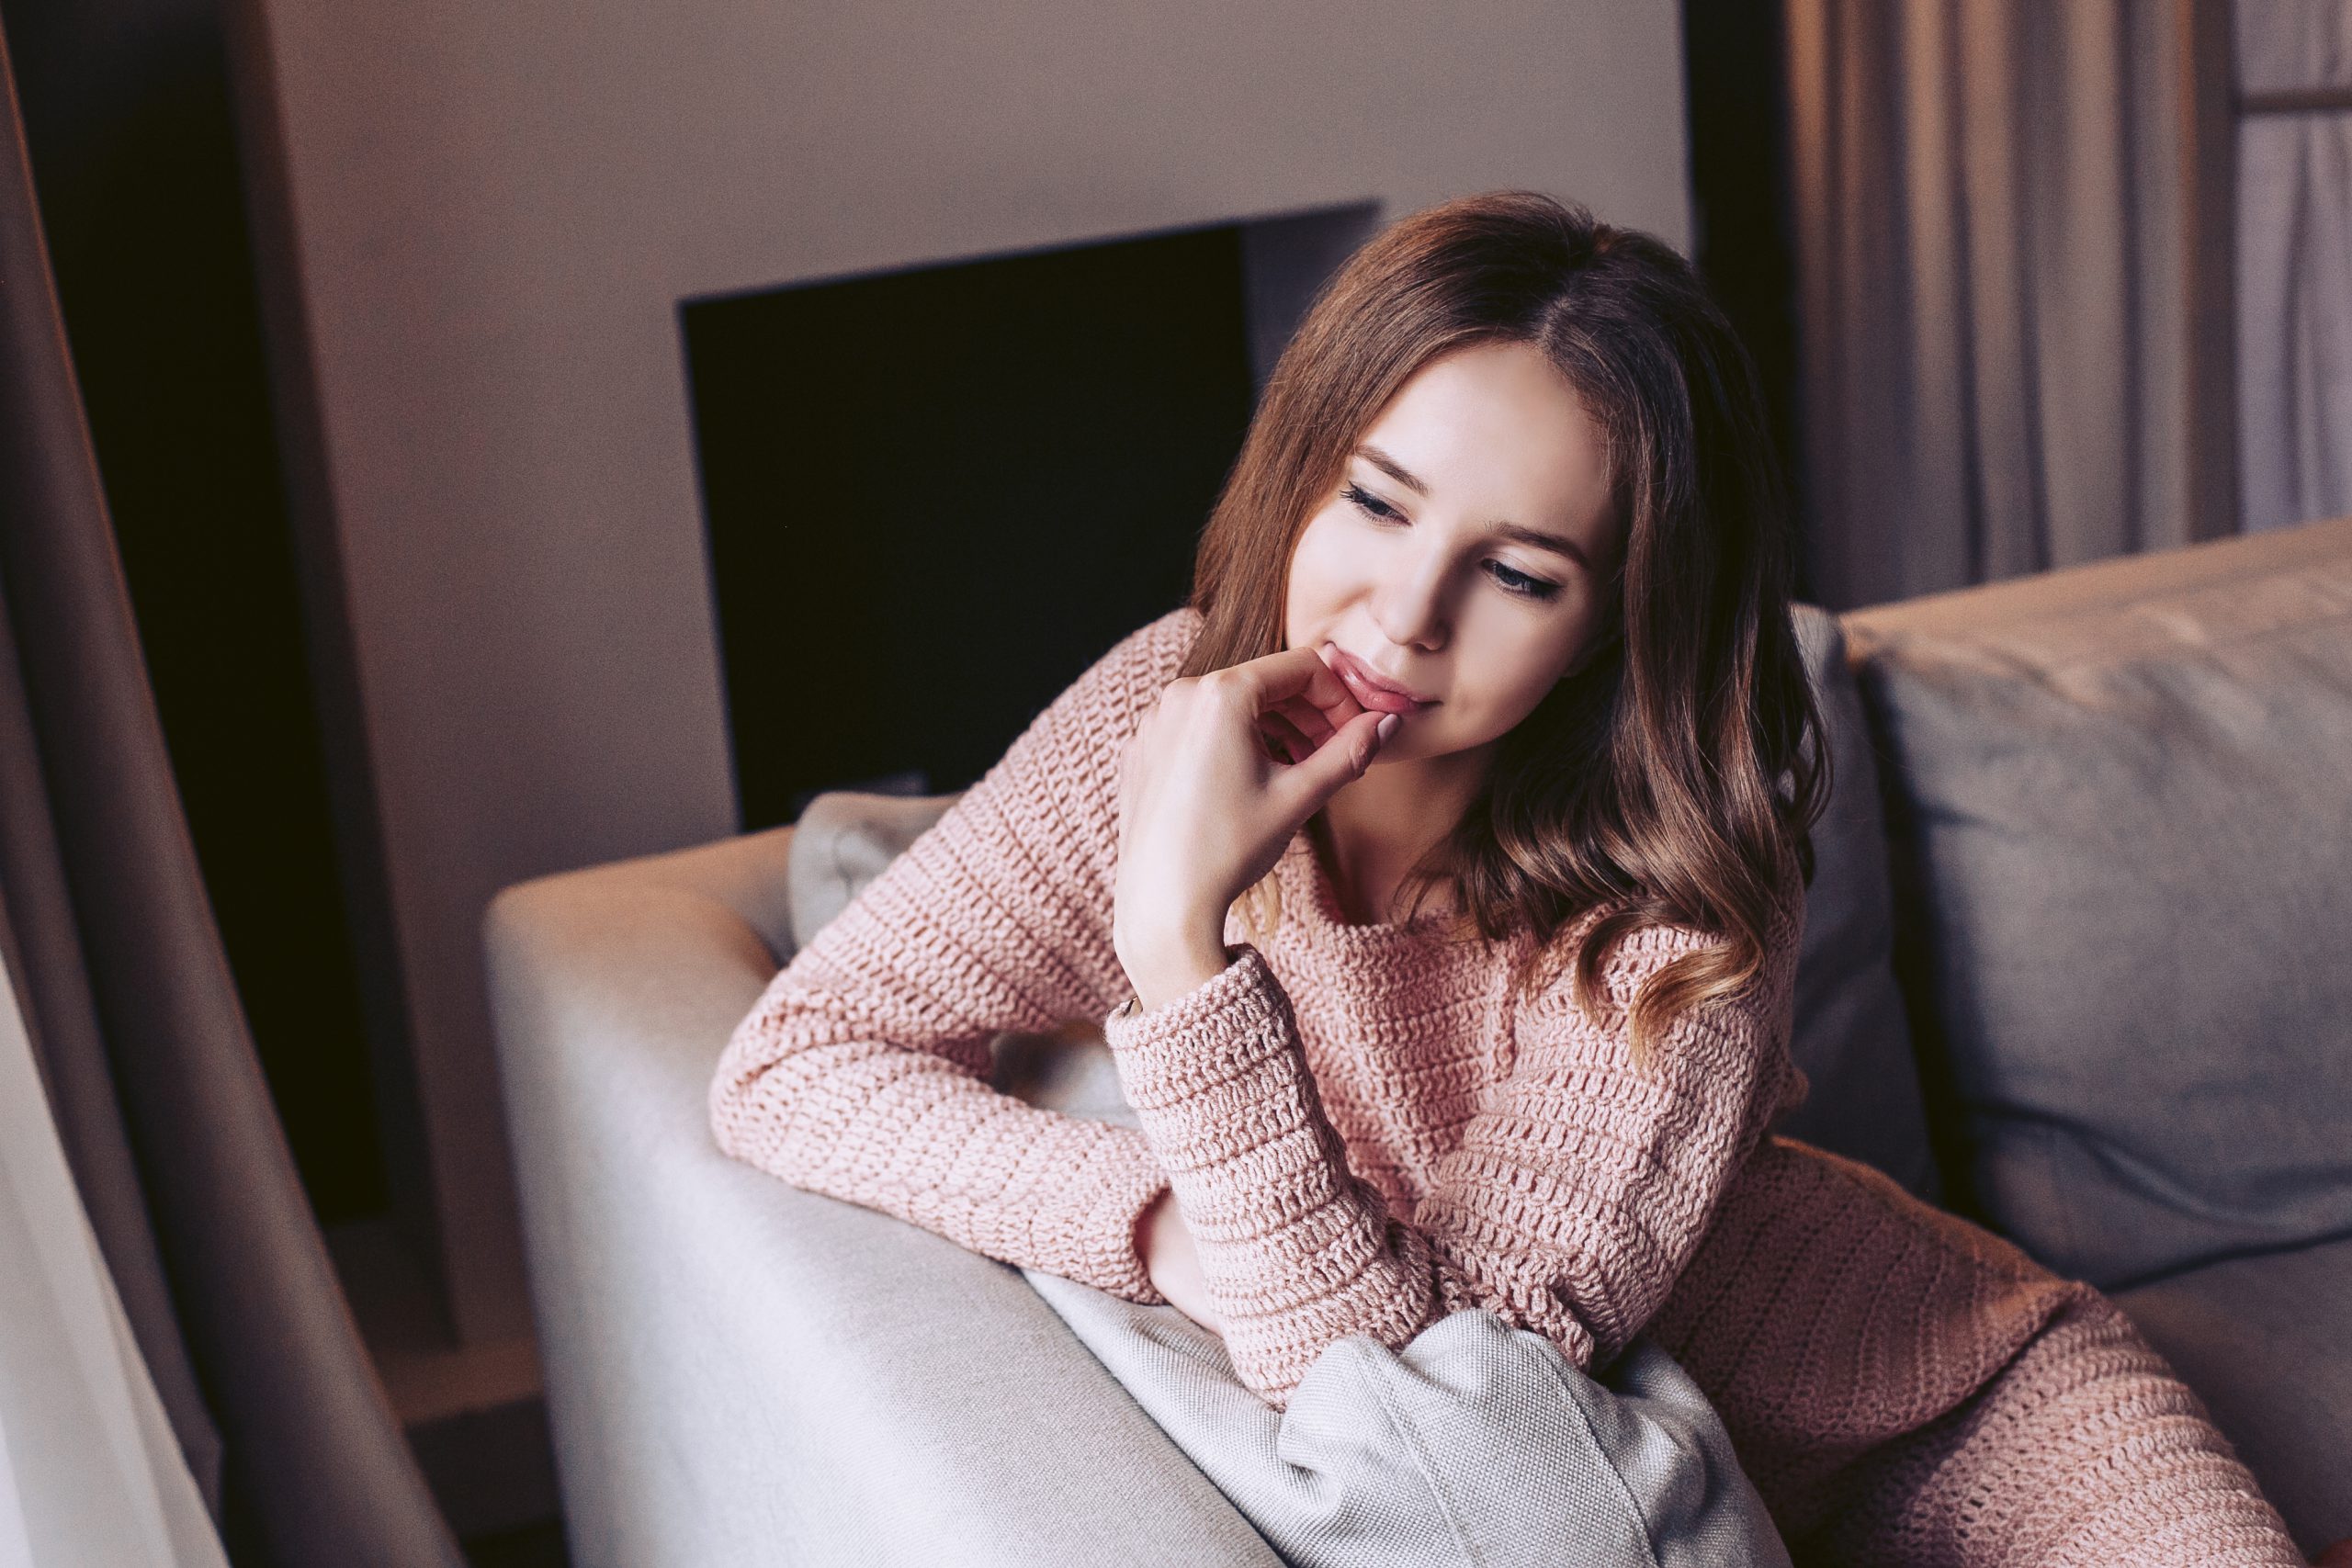 AW21/22: 5 Easy Ways to Style Your Knits!